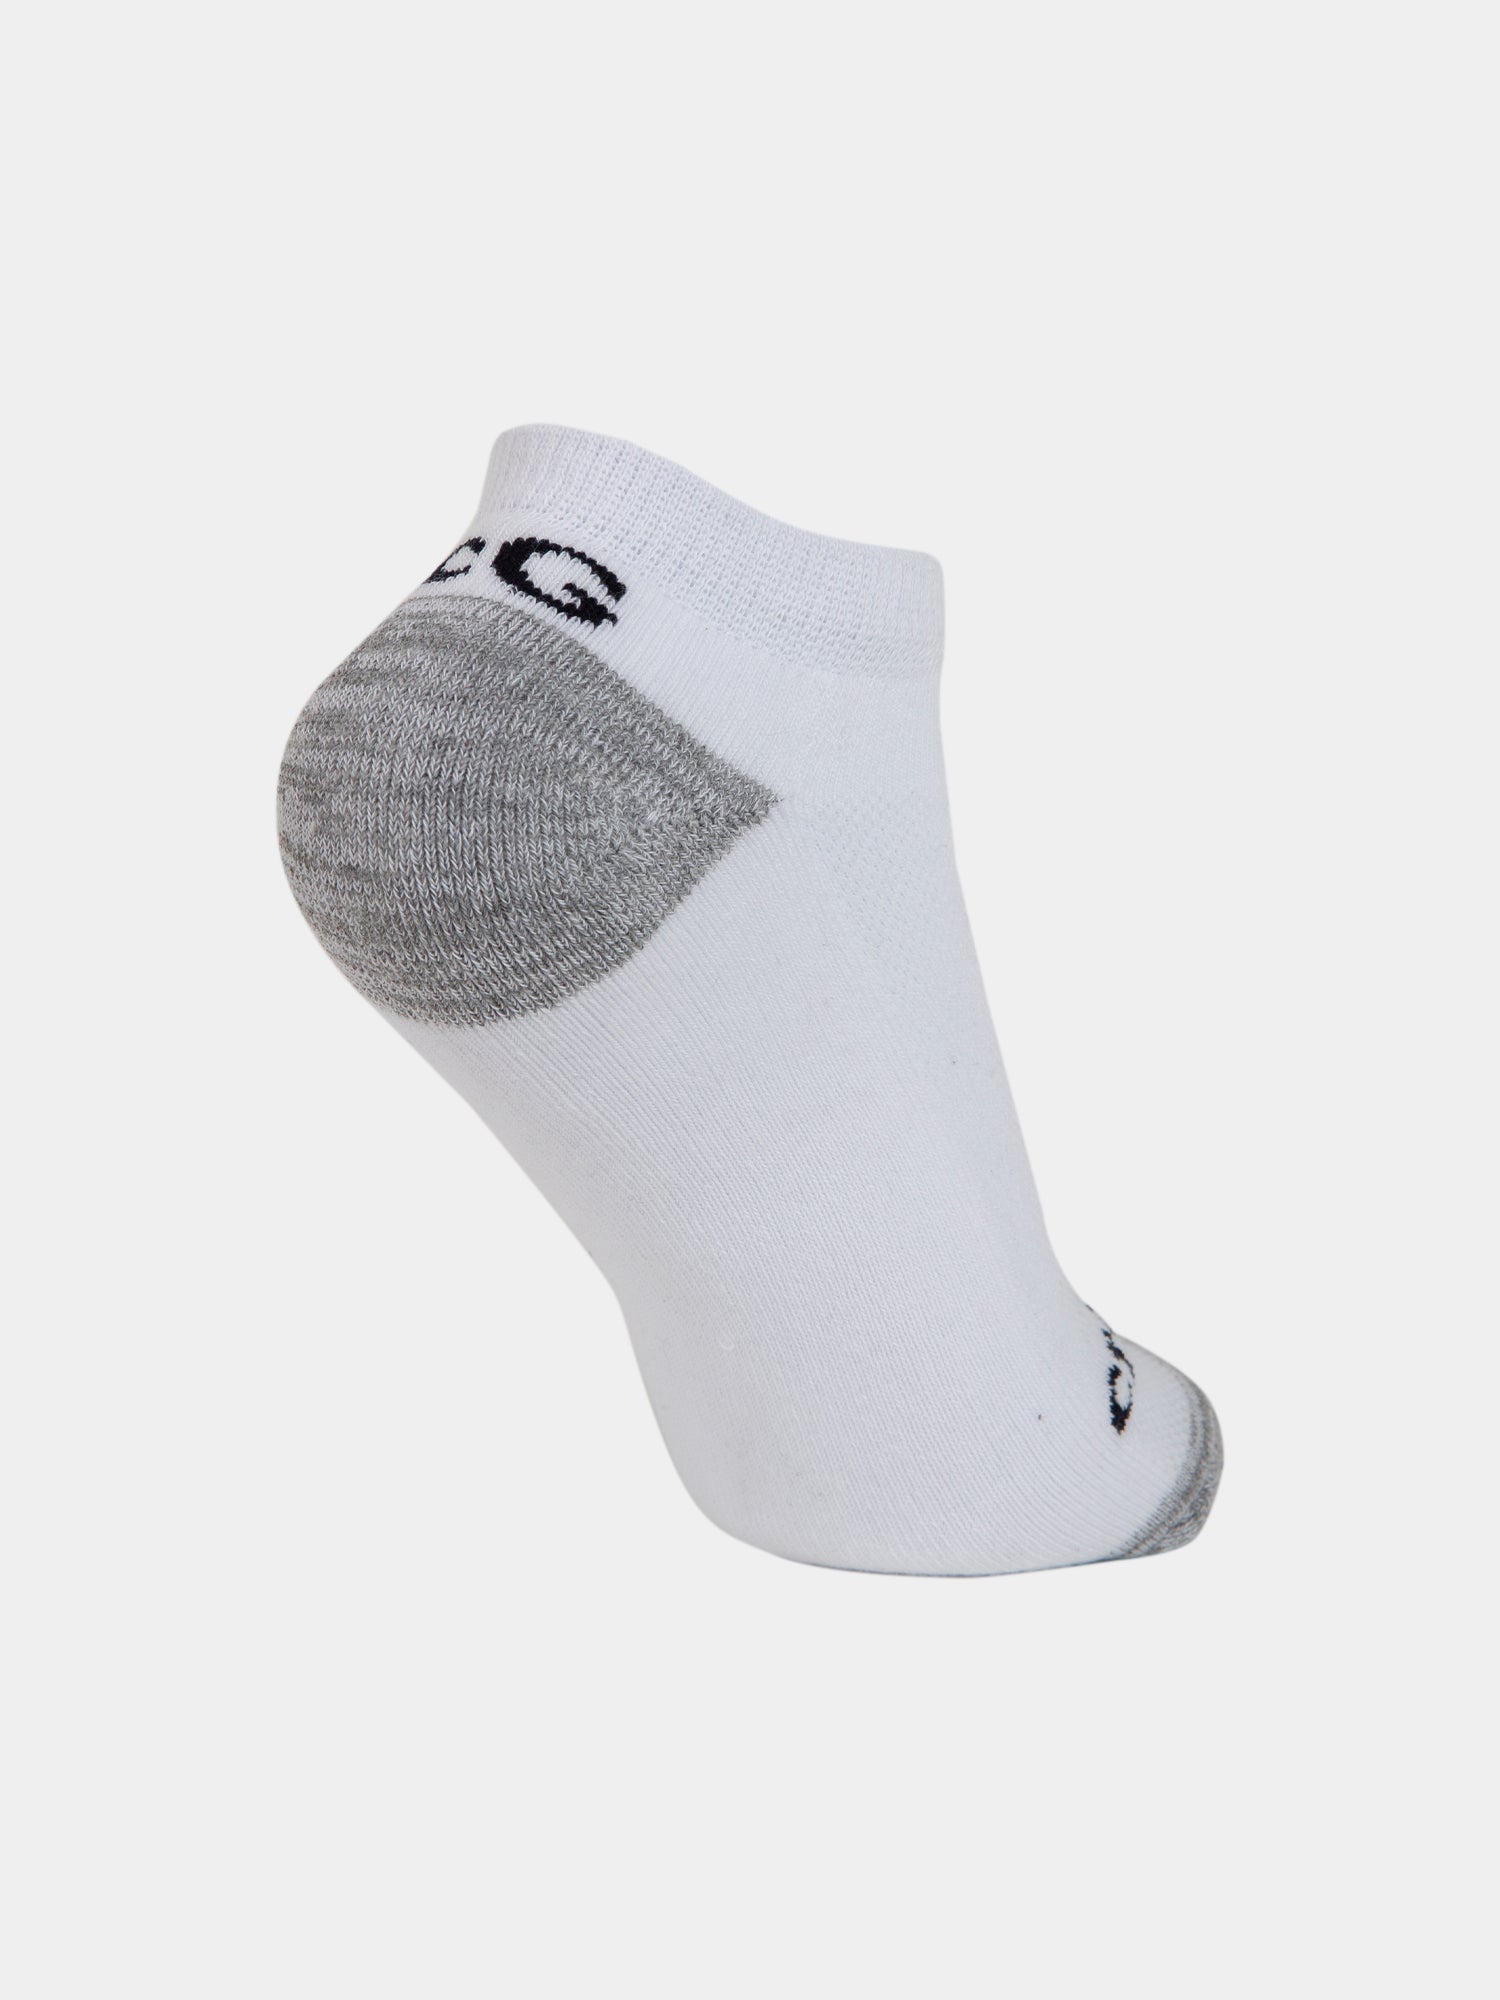 Mens Performance Sports Ankle Sock – 2 Pack